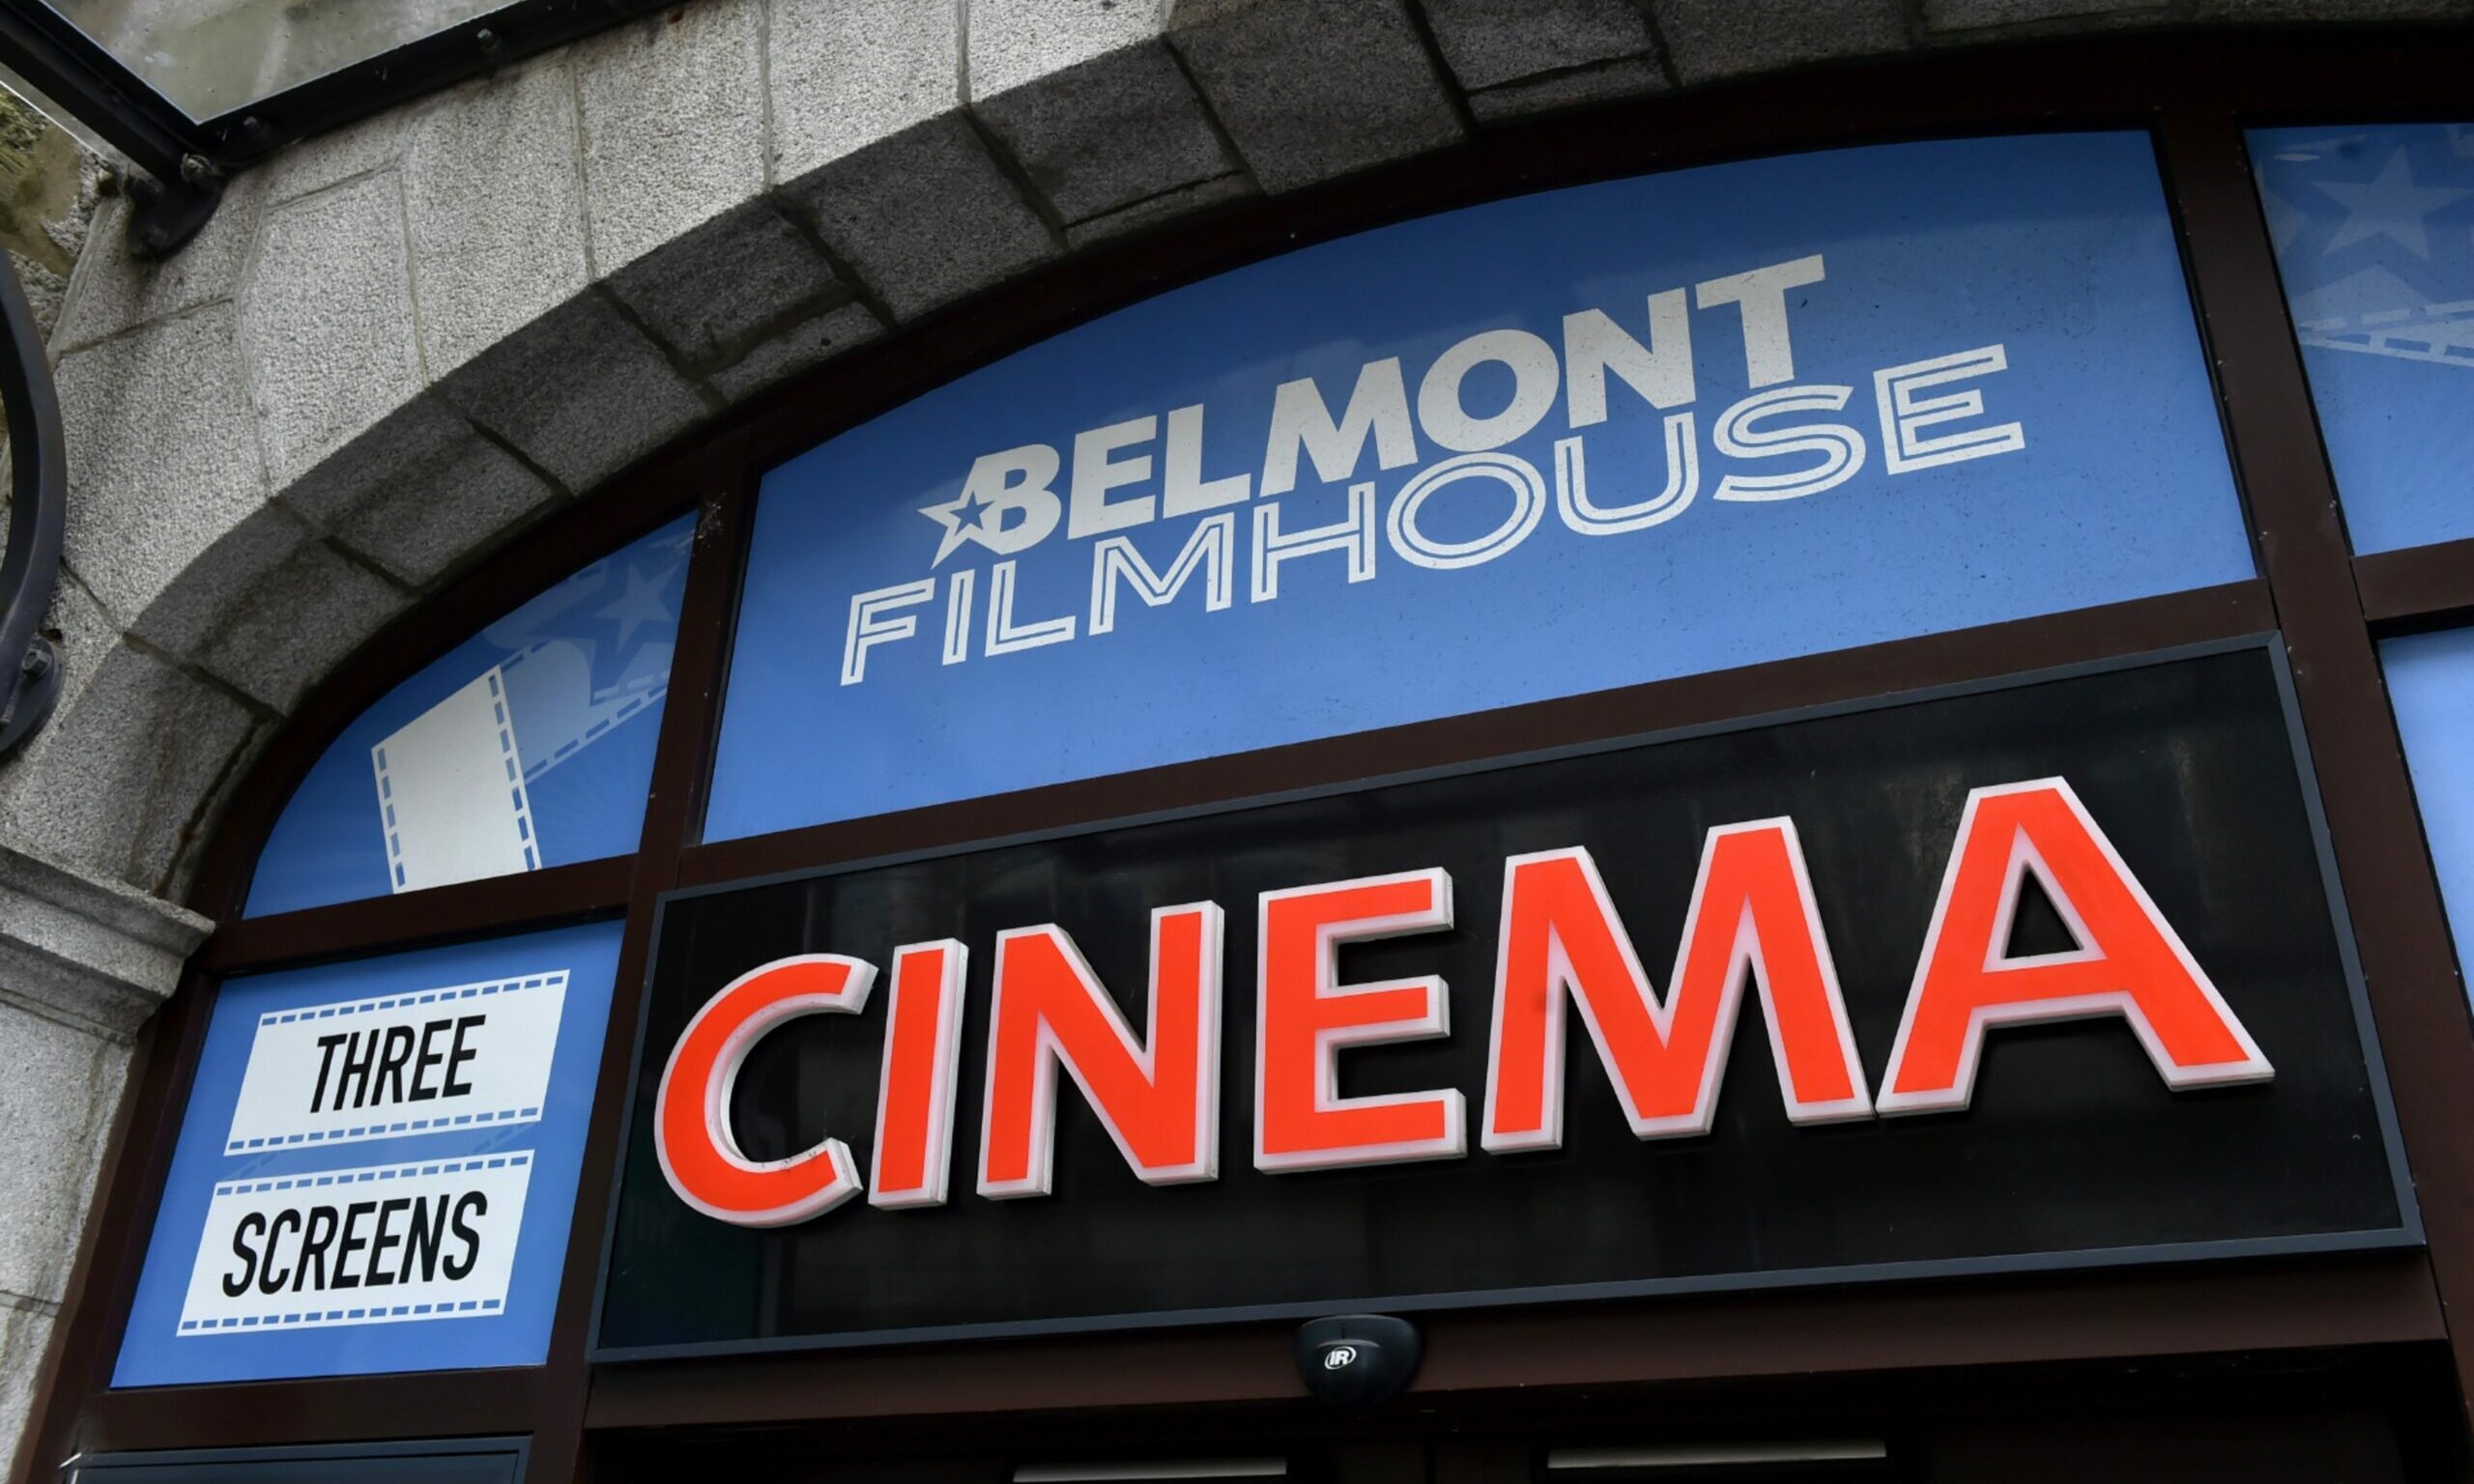 New operators of Belmont Cinema should focus on food and drink, as well as less "high brow" programming to survive reopening, experts say. Image: Kenny Elrick/DC Thomson.